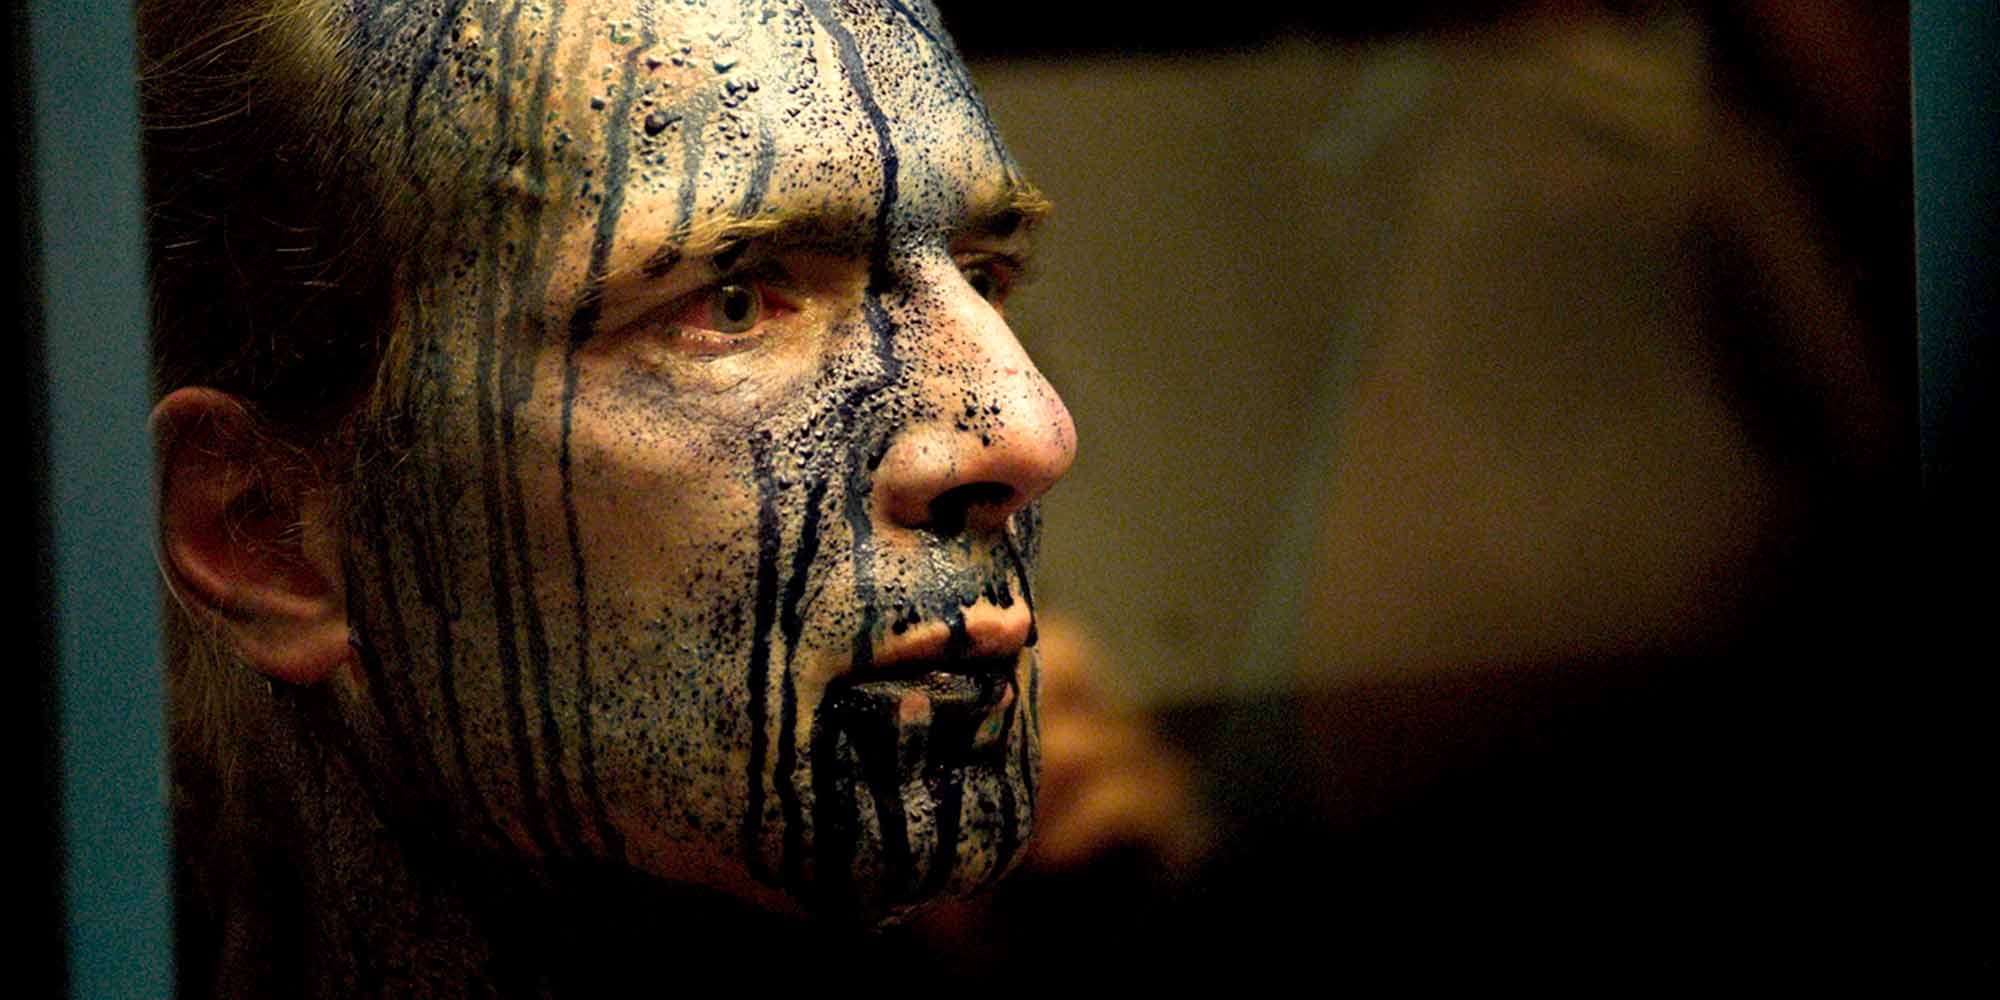 <strong>2007:</strong> "Bleu Remix" is an impressive live performance in which Yann Marussich artists remain motionless for hours, while blue liquid emerges from his mouth, nose and the pores of his skin.